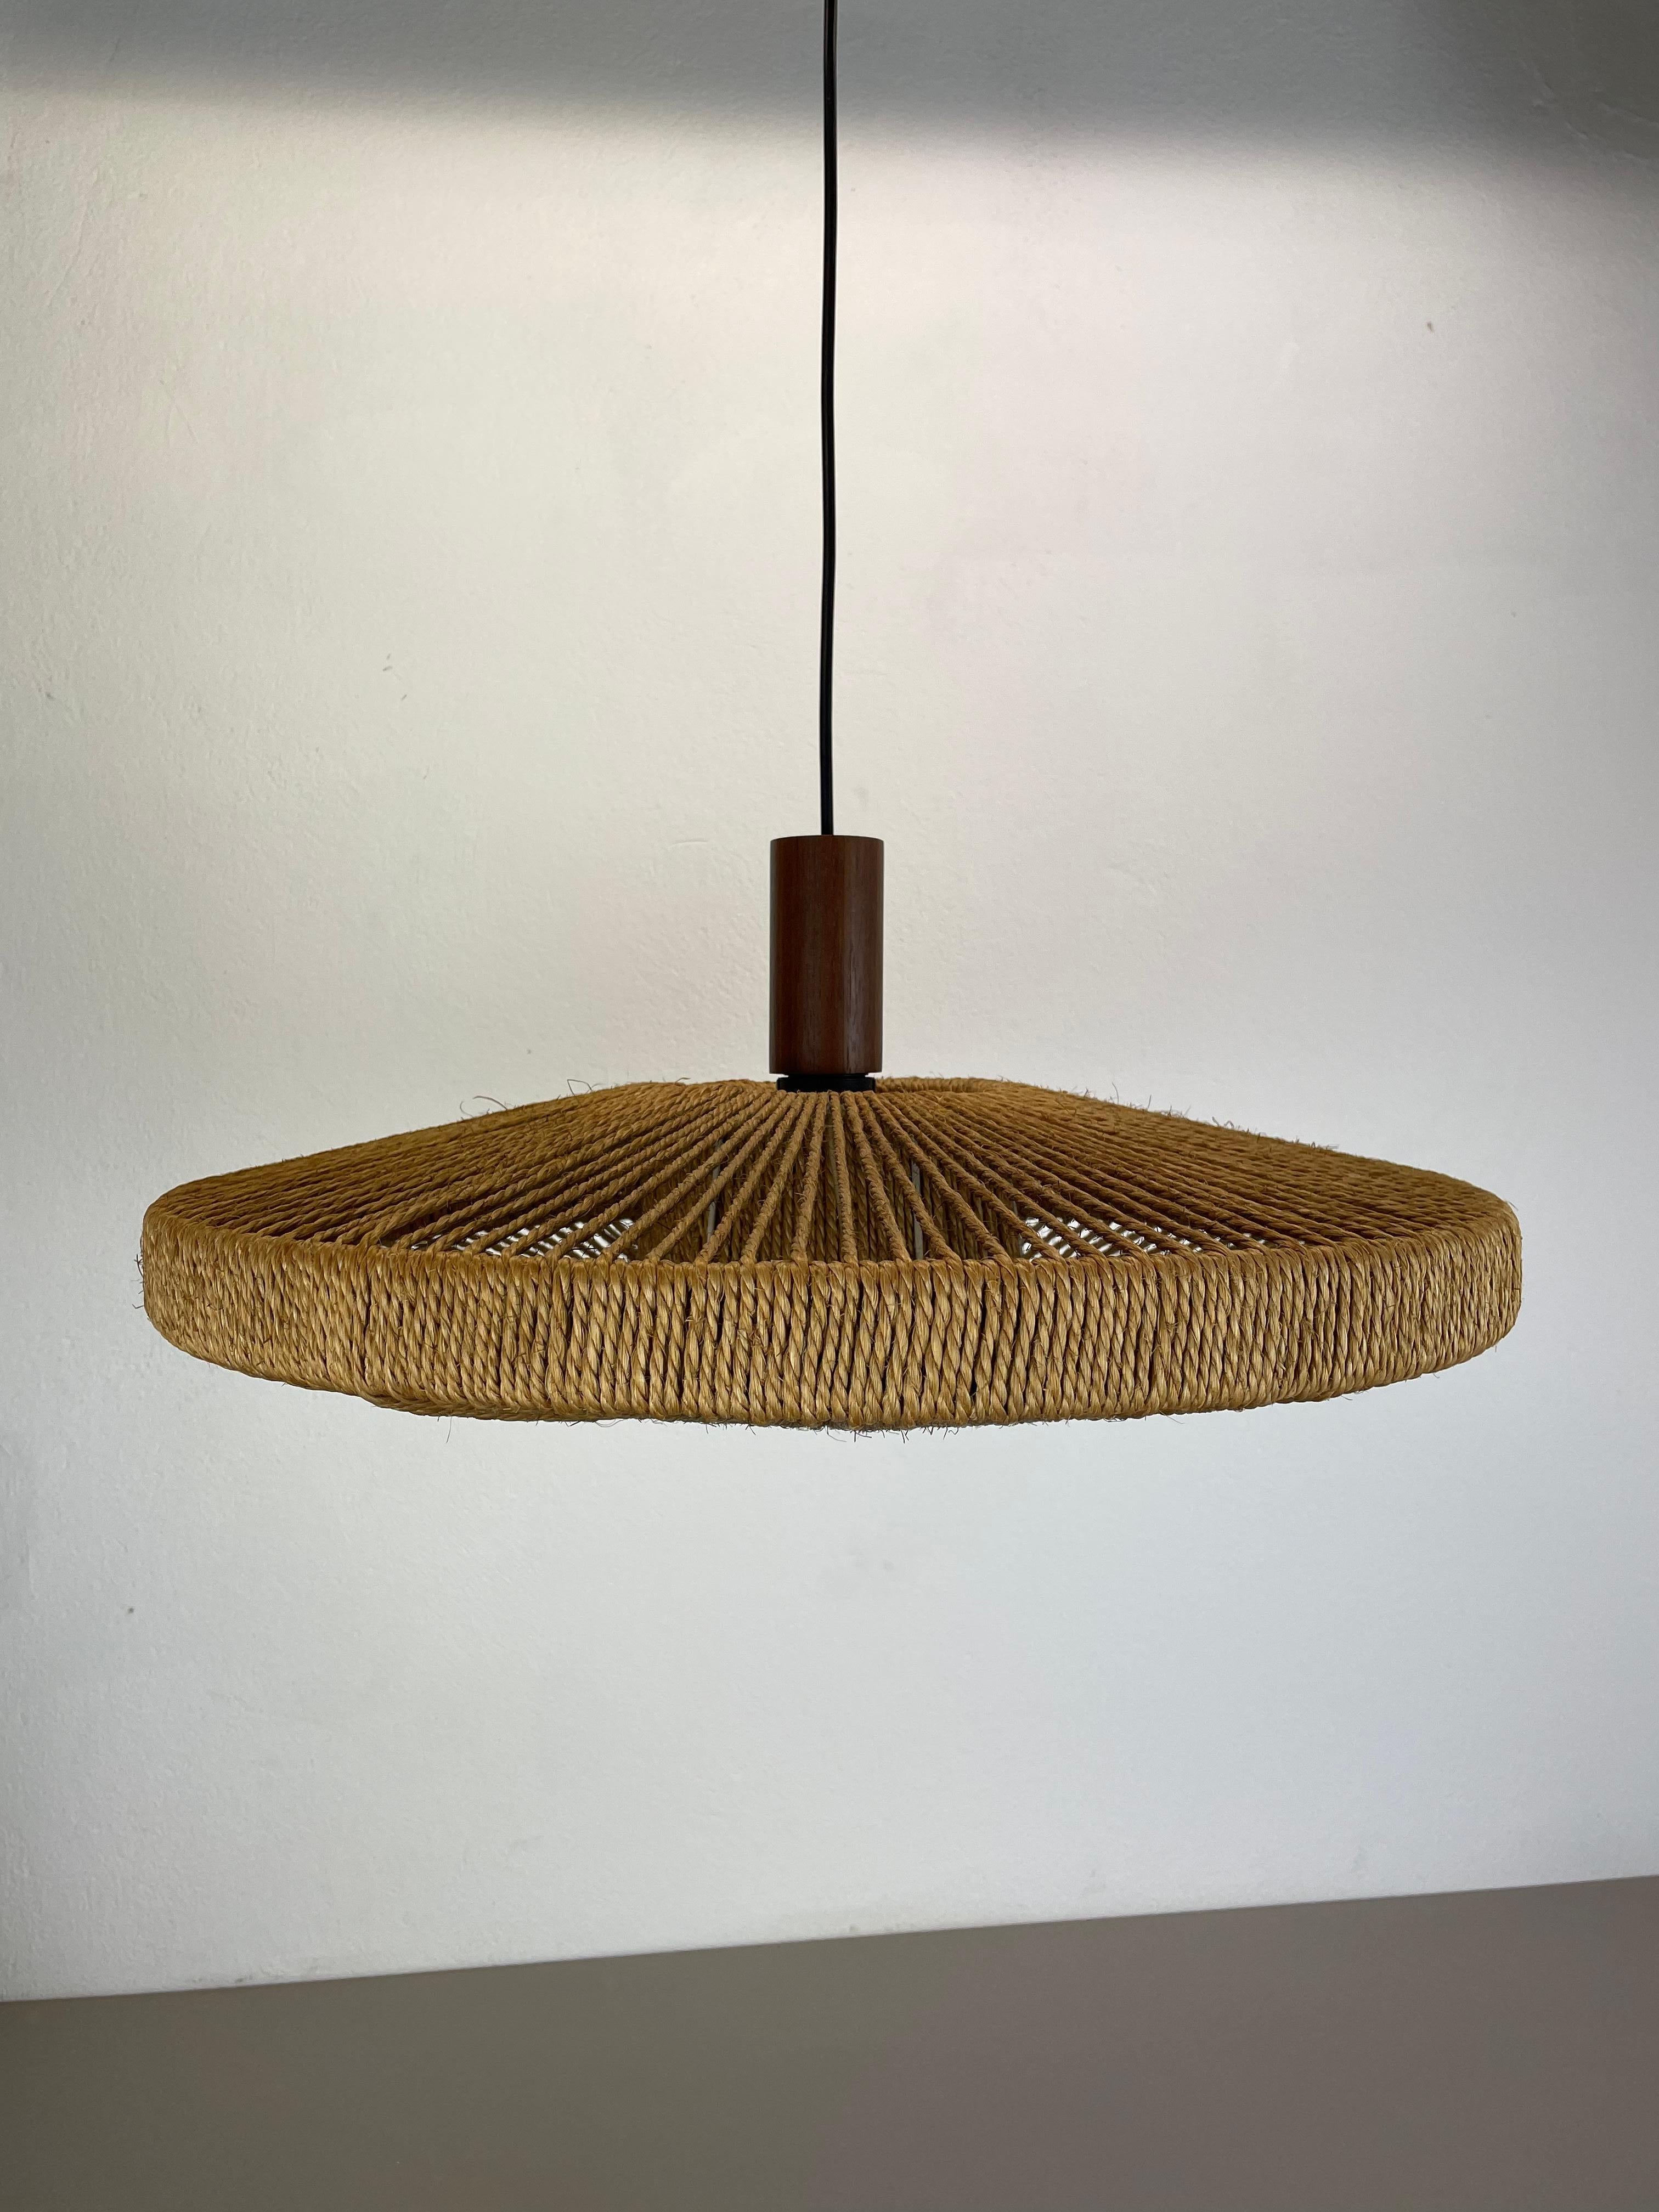 56cm Organic Sisal and Teak Ufo Hanging Light Made by Temde Lights Germany 1960s For Sale 5